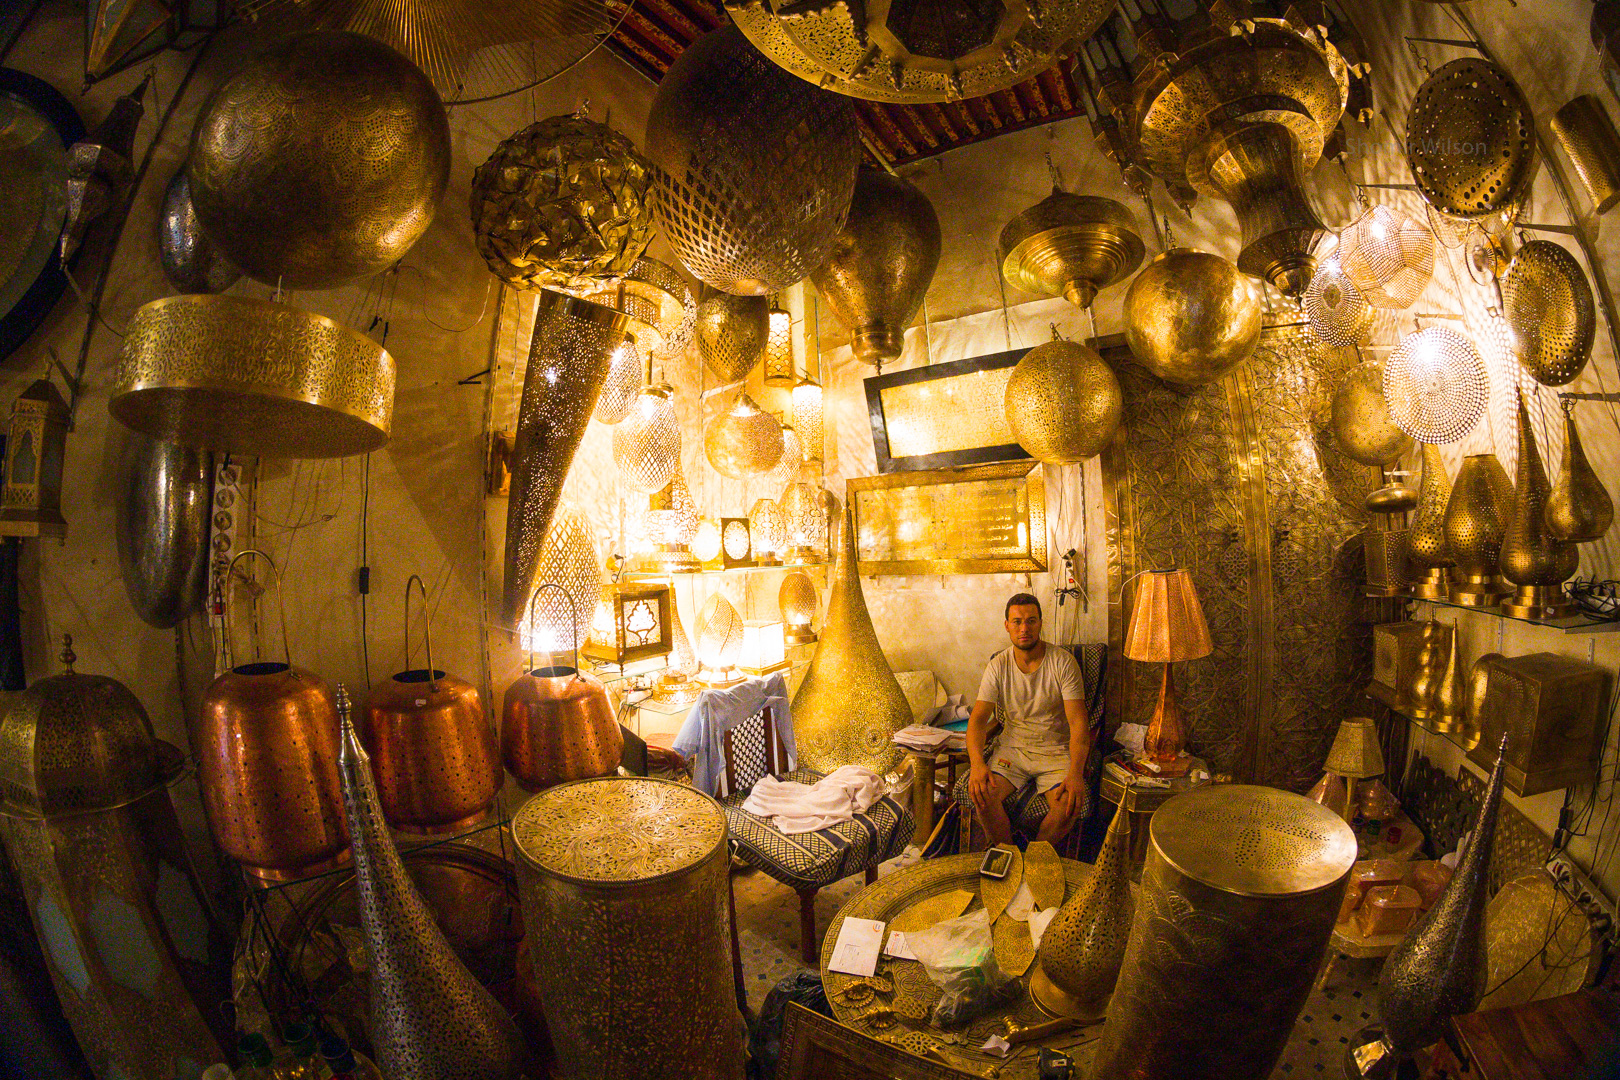 Intricate brass lamps in a lamp shop, with a man sitting in the back